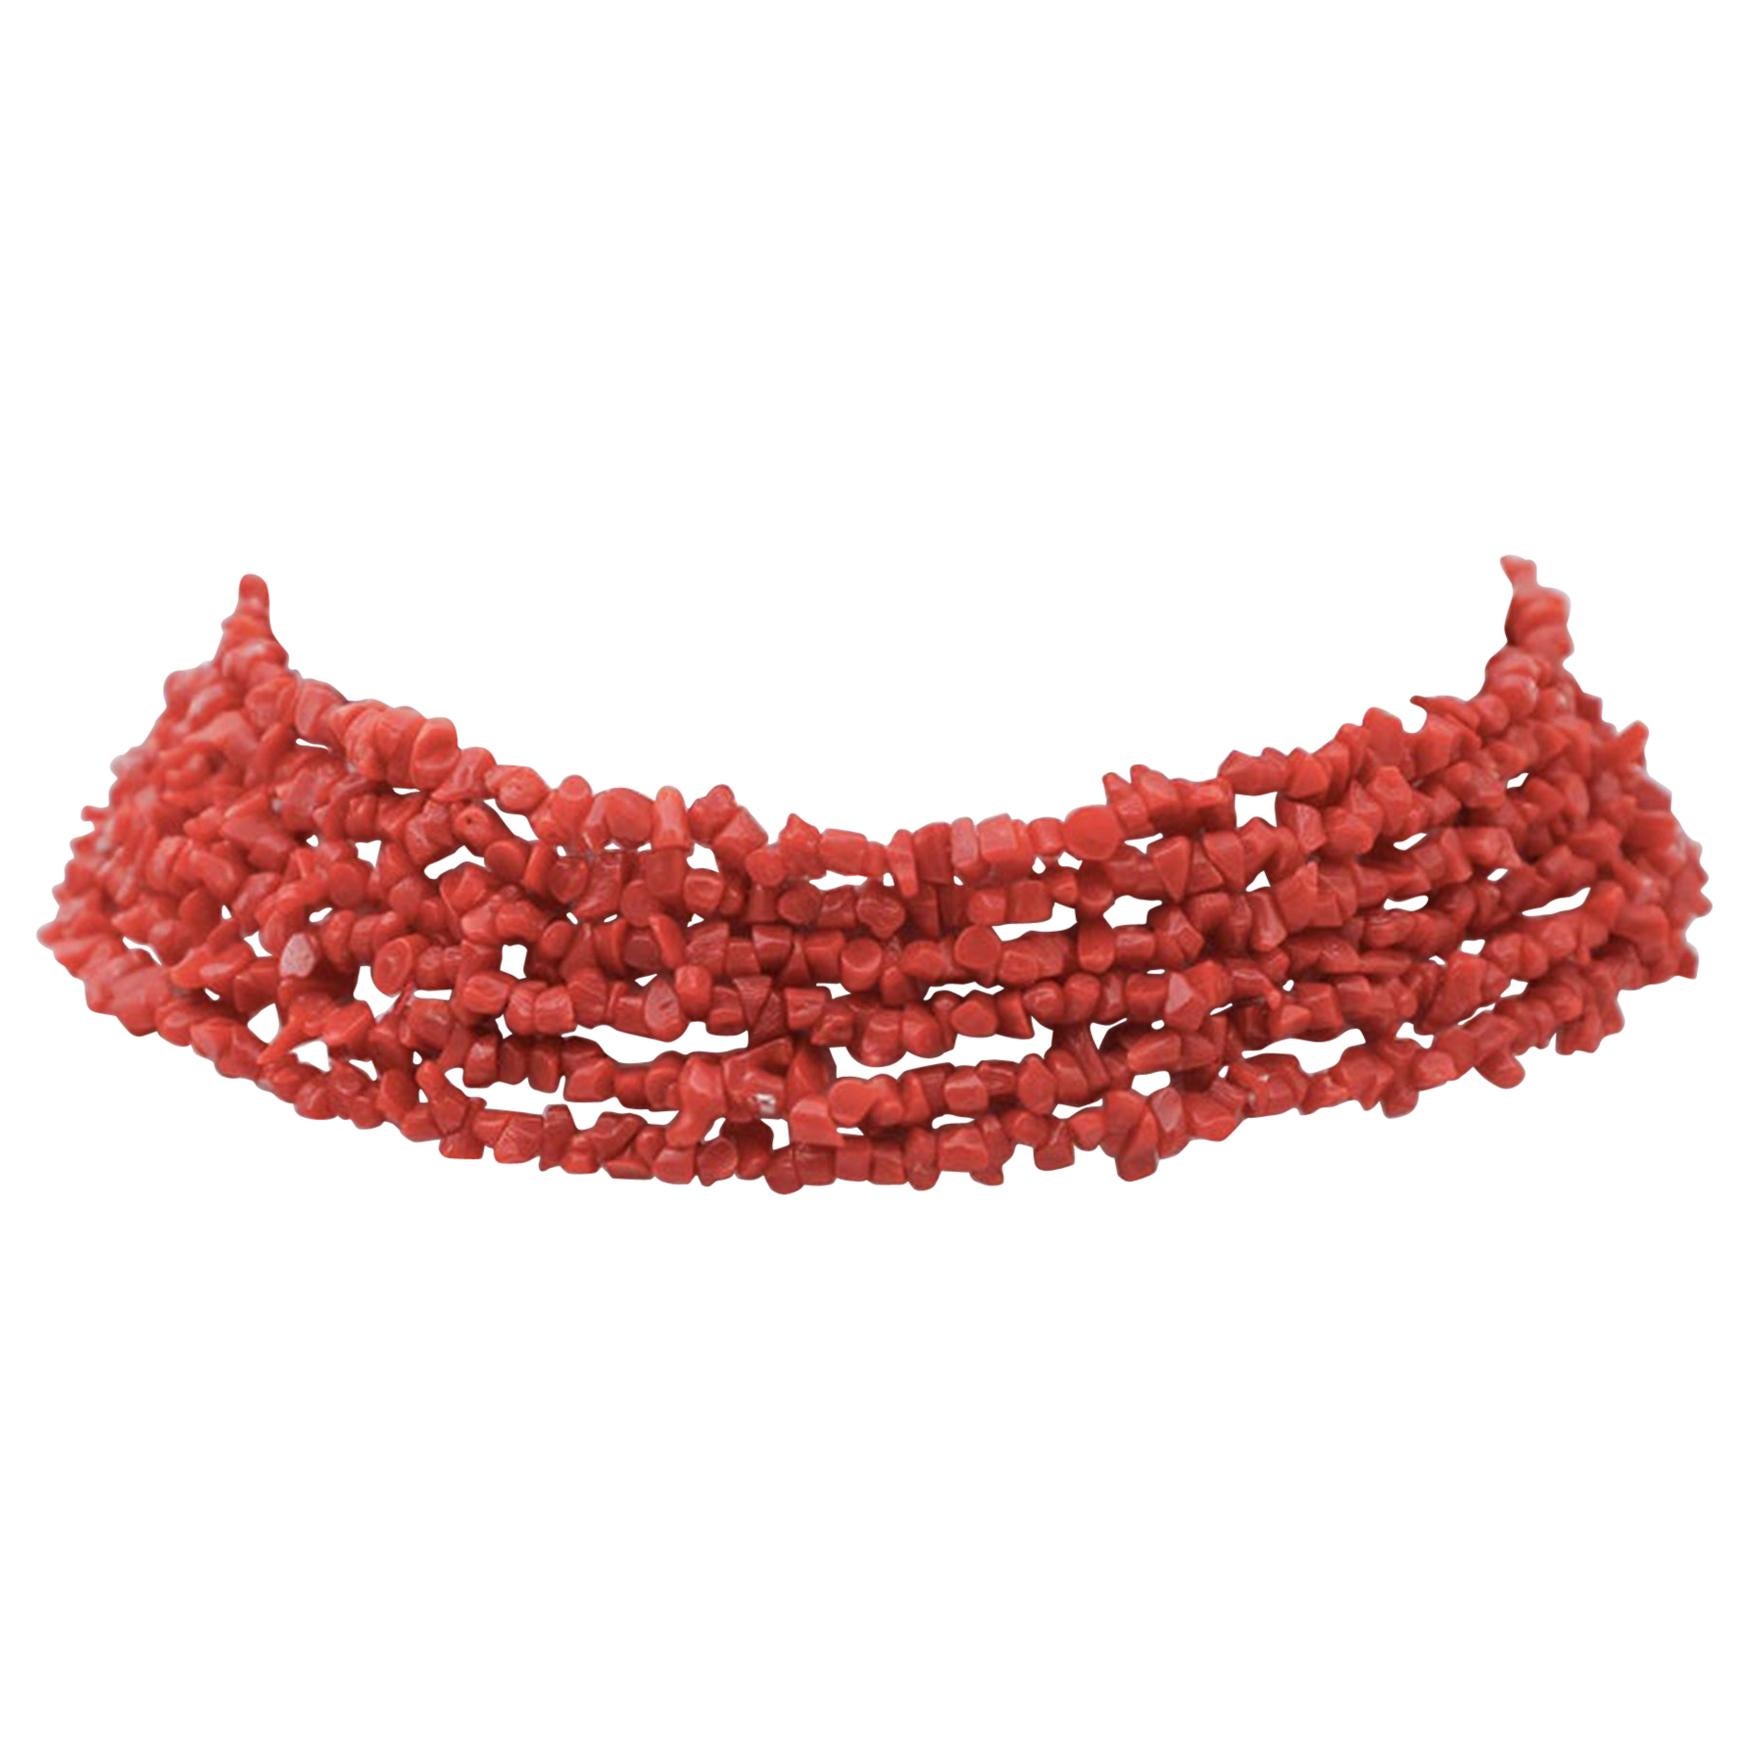 Coral Bead Necklace with Hand Clasp – The Vintage Jewellery Company